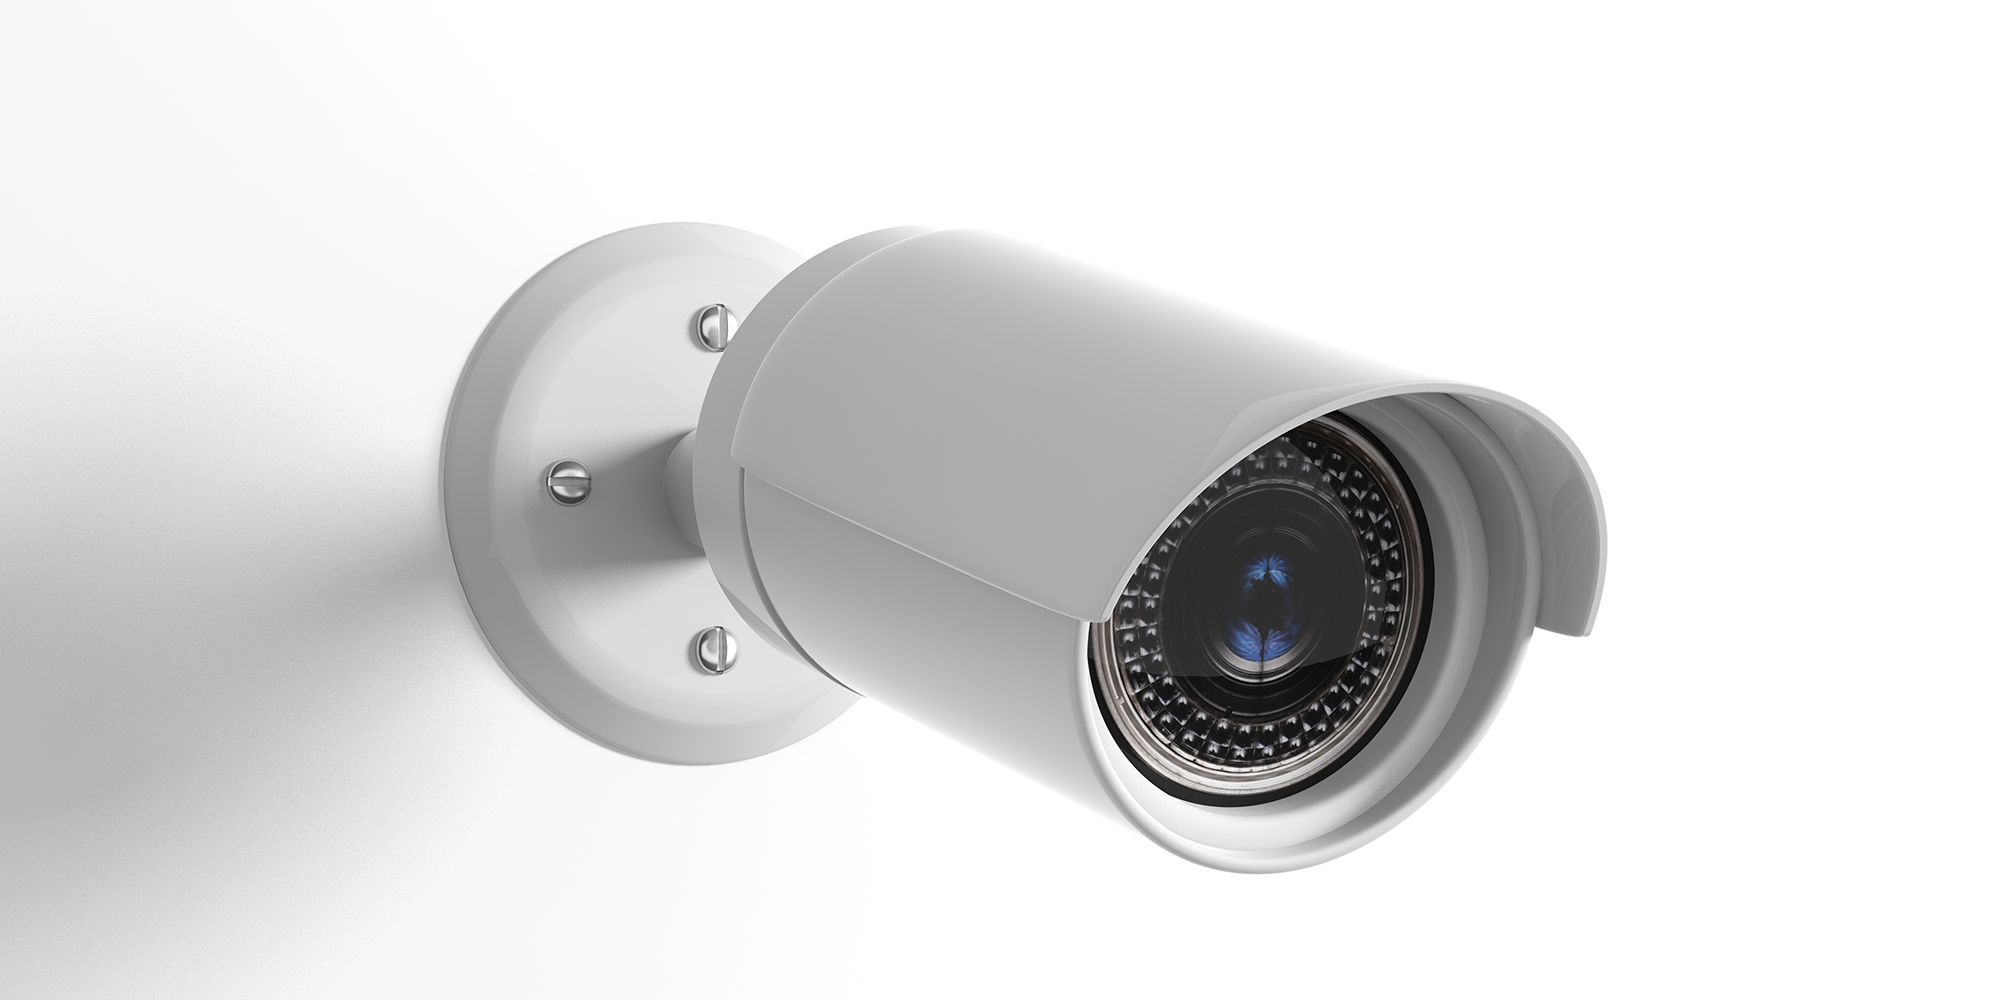  Protect your home   CCTV installs    Call Now for a quote  